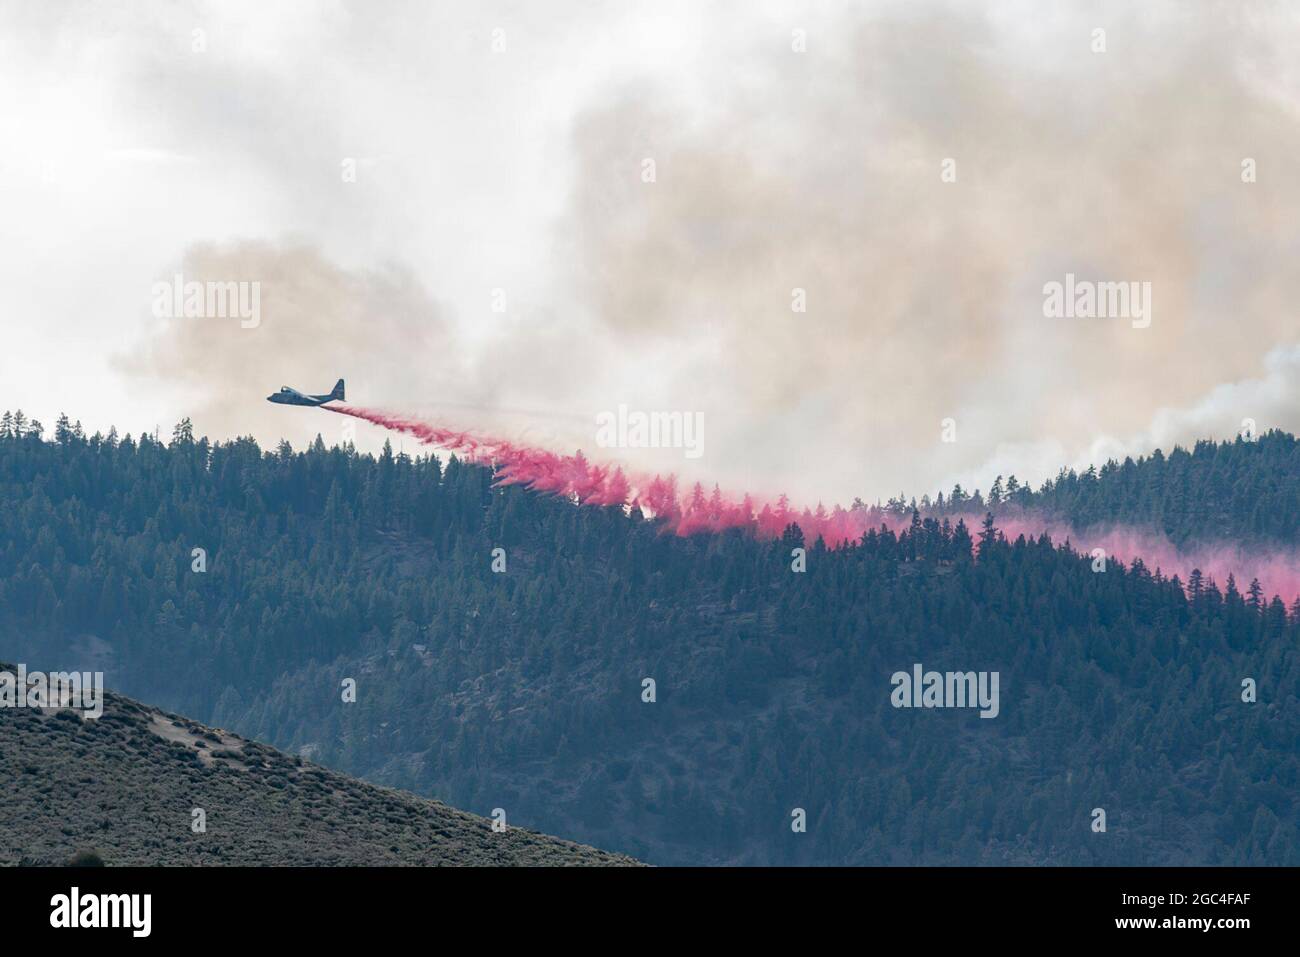 Air National Guard C-130 drops retardant on the Beckwourth Complex Fire July 9, 2021 near Frenchman Lake in N. California. In addition to other resources, three Air National Guard C-130s--two from Nevada and one from California will assist in battling the Beckwourth Complex Fire in Northern California. The USDA Forest Service activated the MAFFS-equipped Air Force C-130 aircraft through a DoD request for assistance. Stock Photo